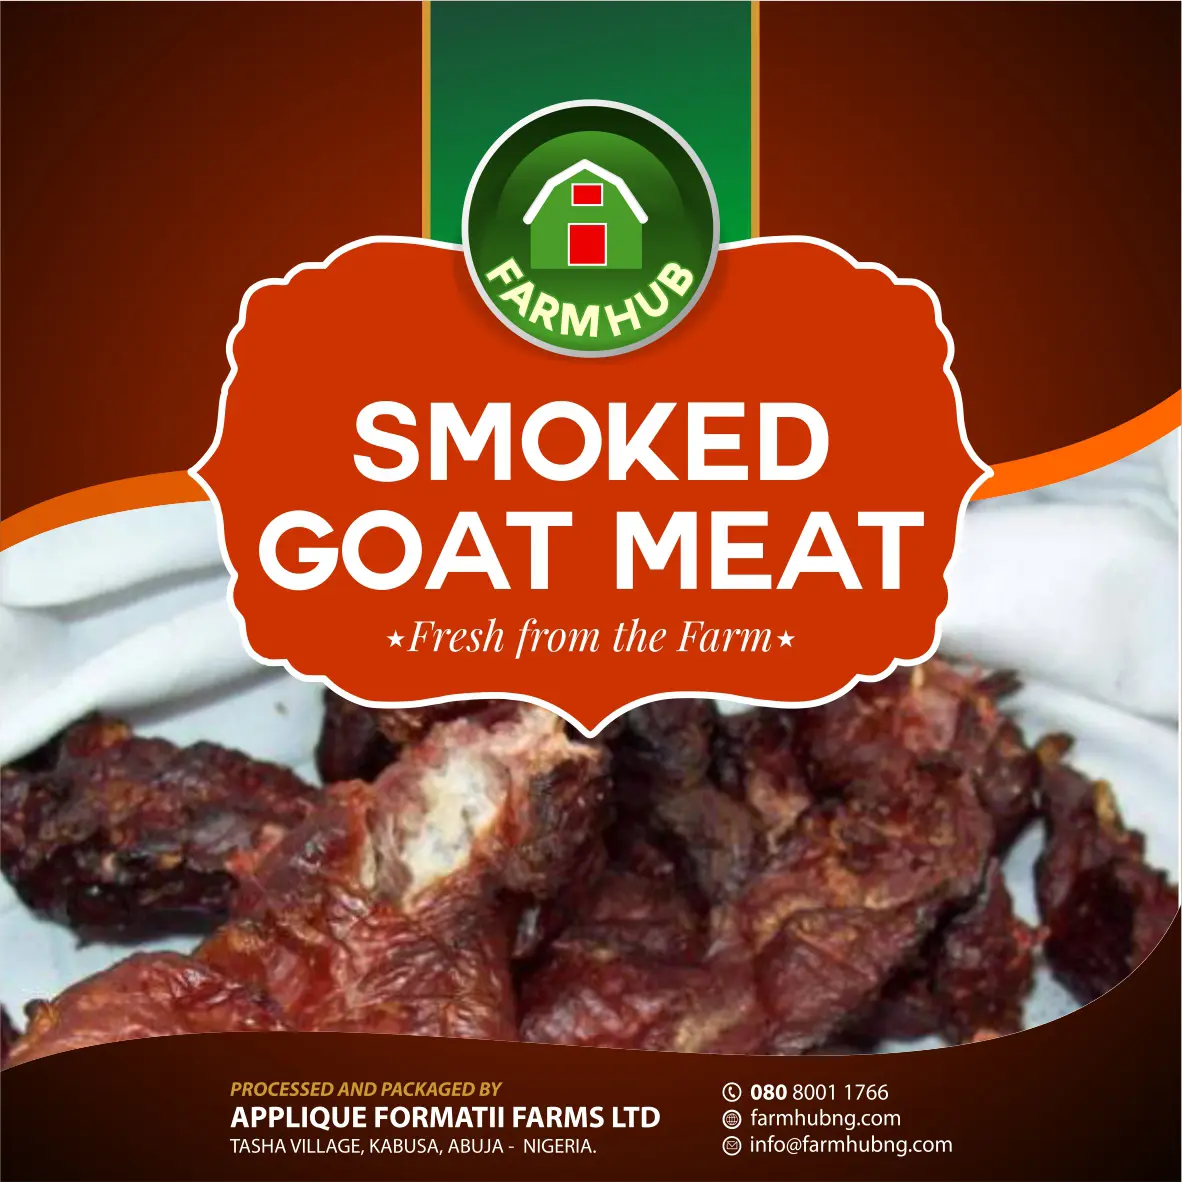 smoked goat meat for sale - Is lamb or goat cheaper